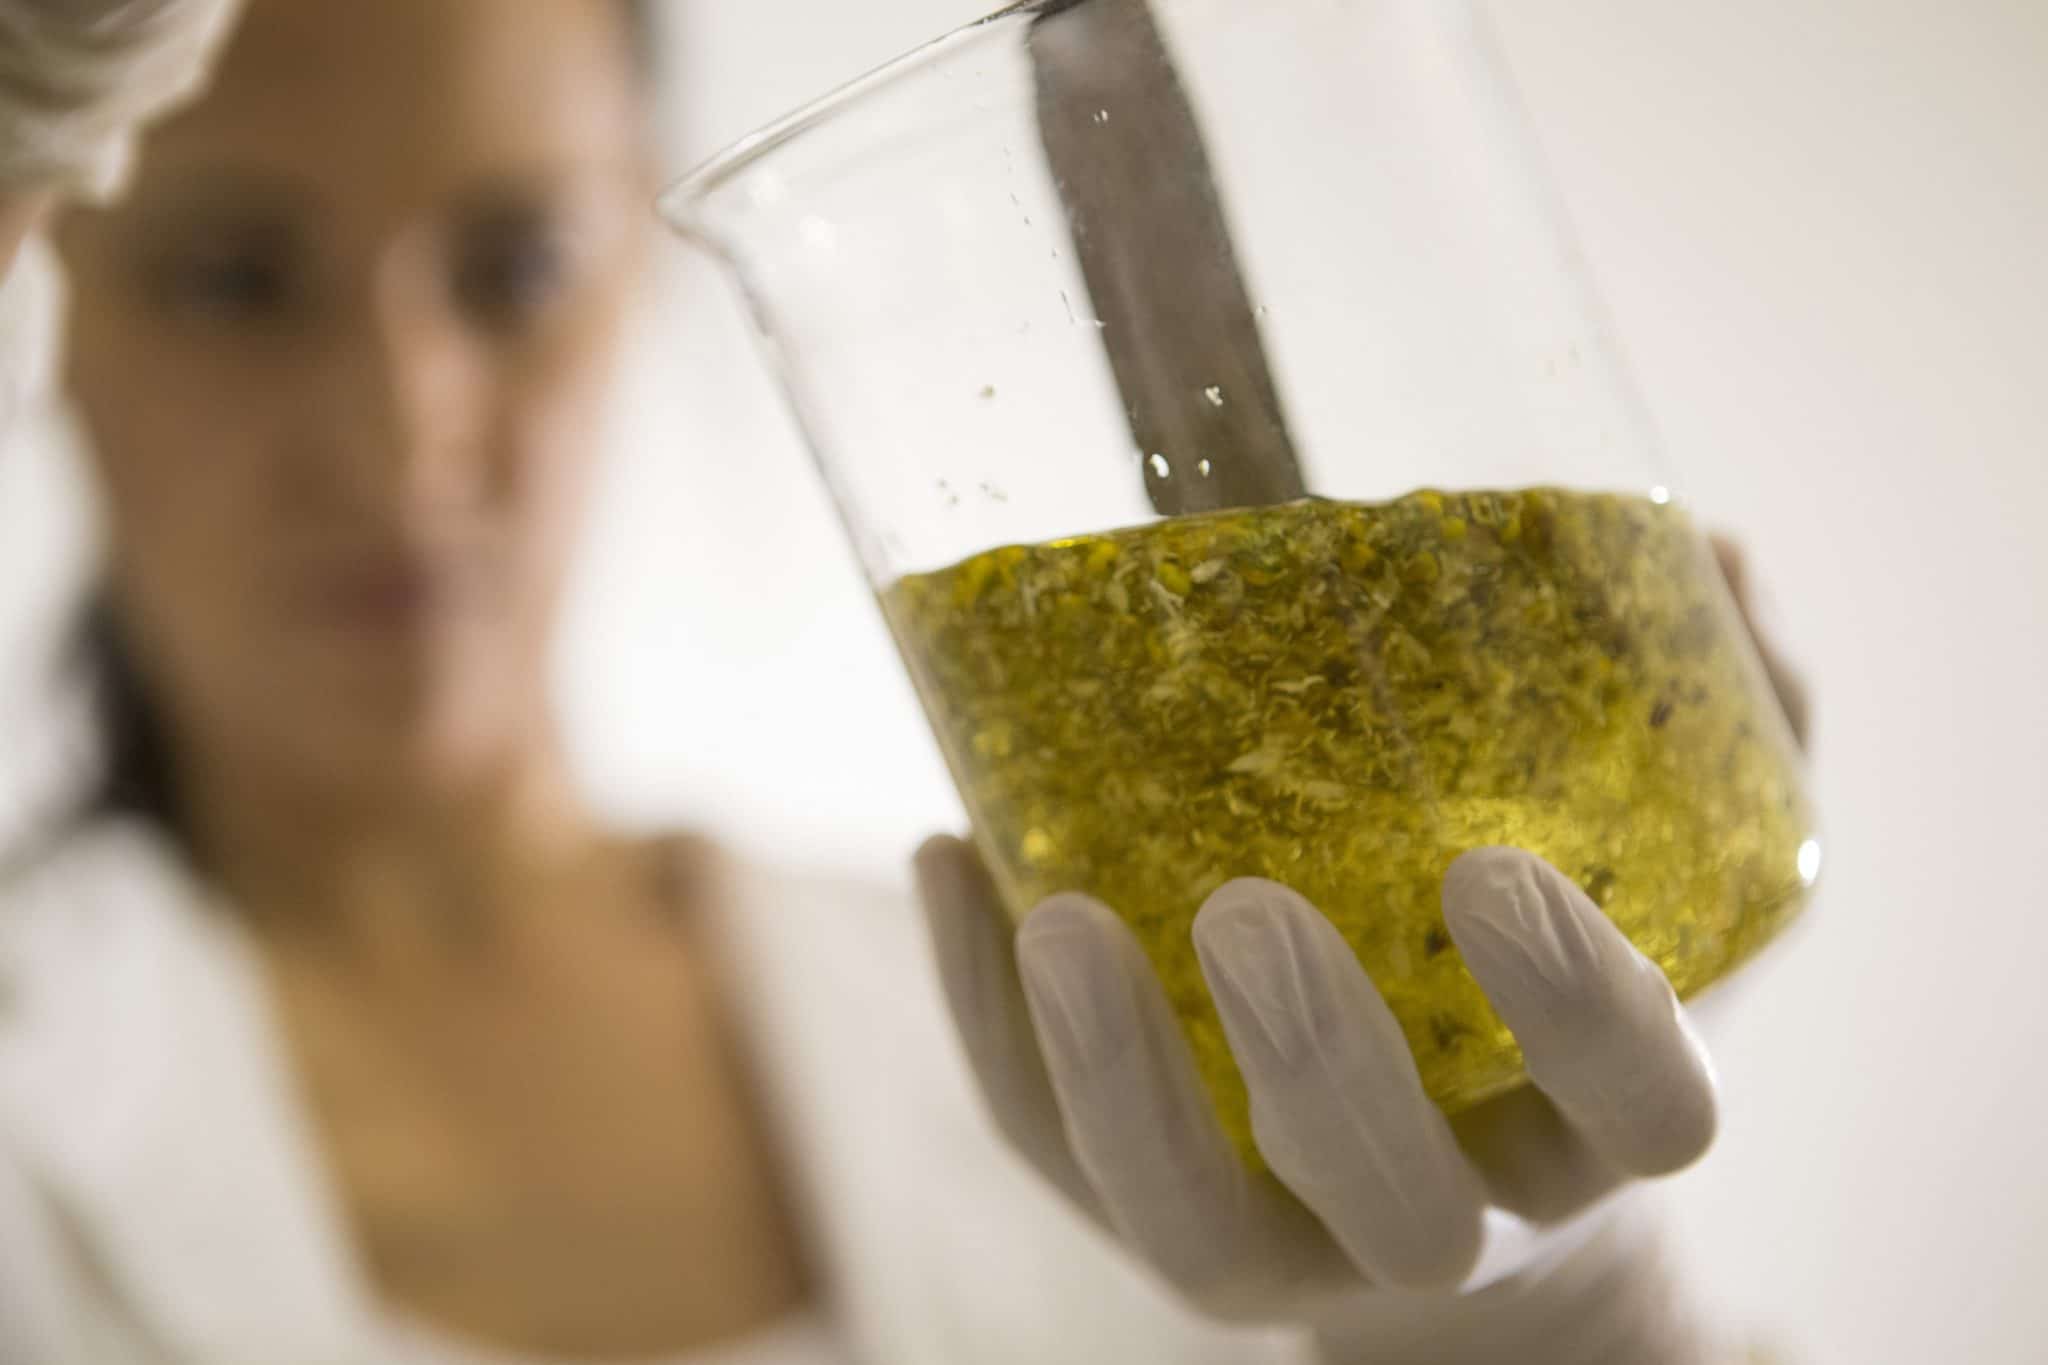 Scientist holding a glass jar of oil.